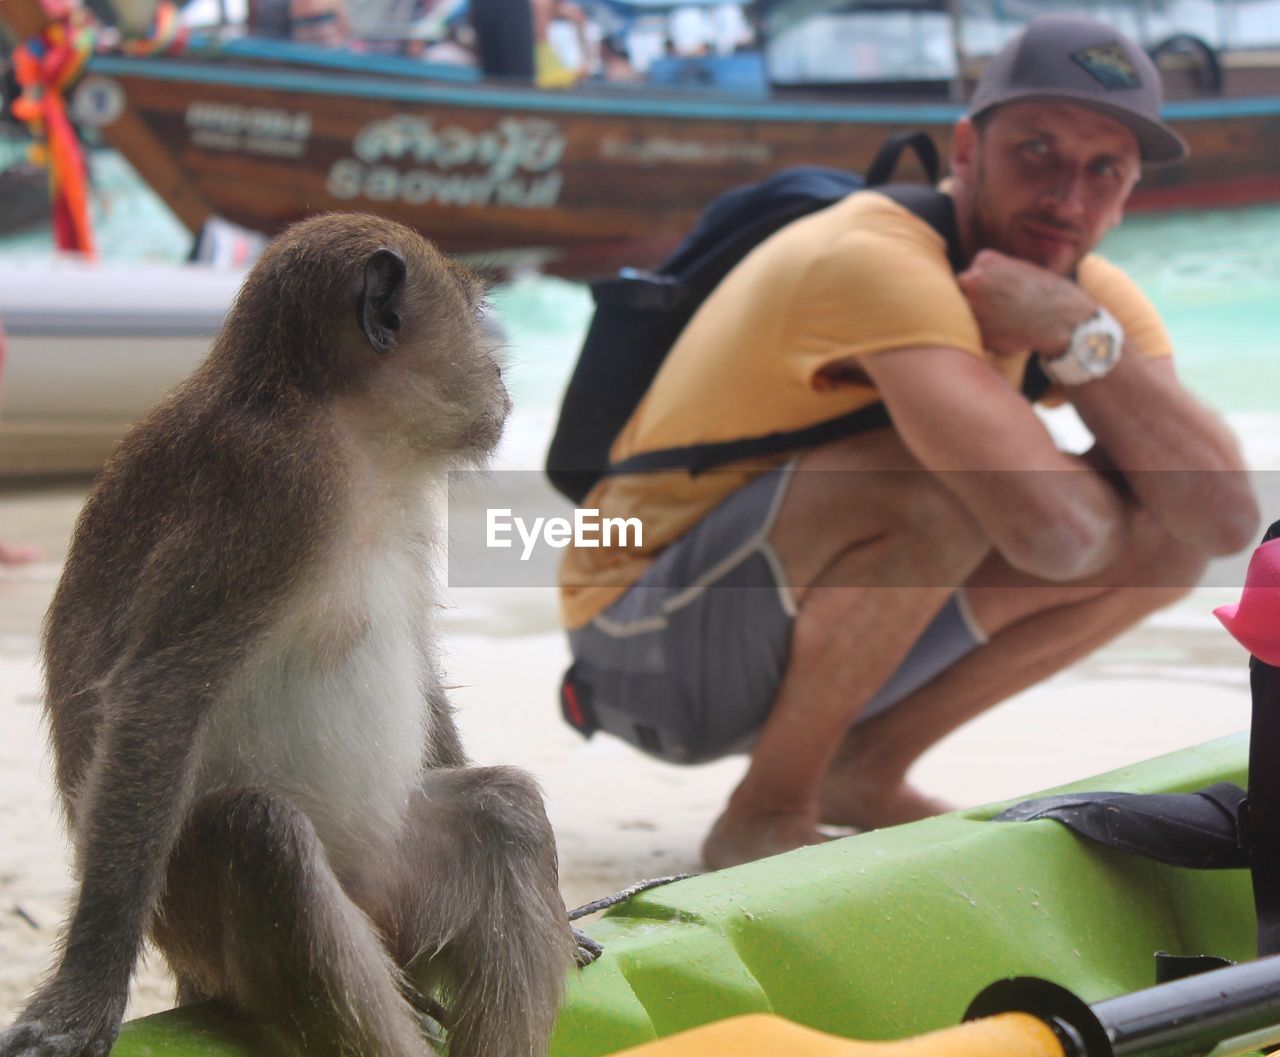 Backpacker crouching by monkey at beach